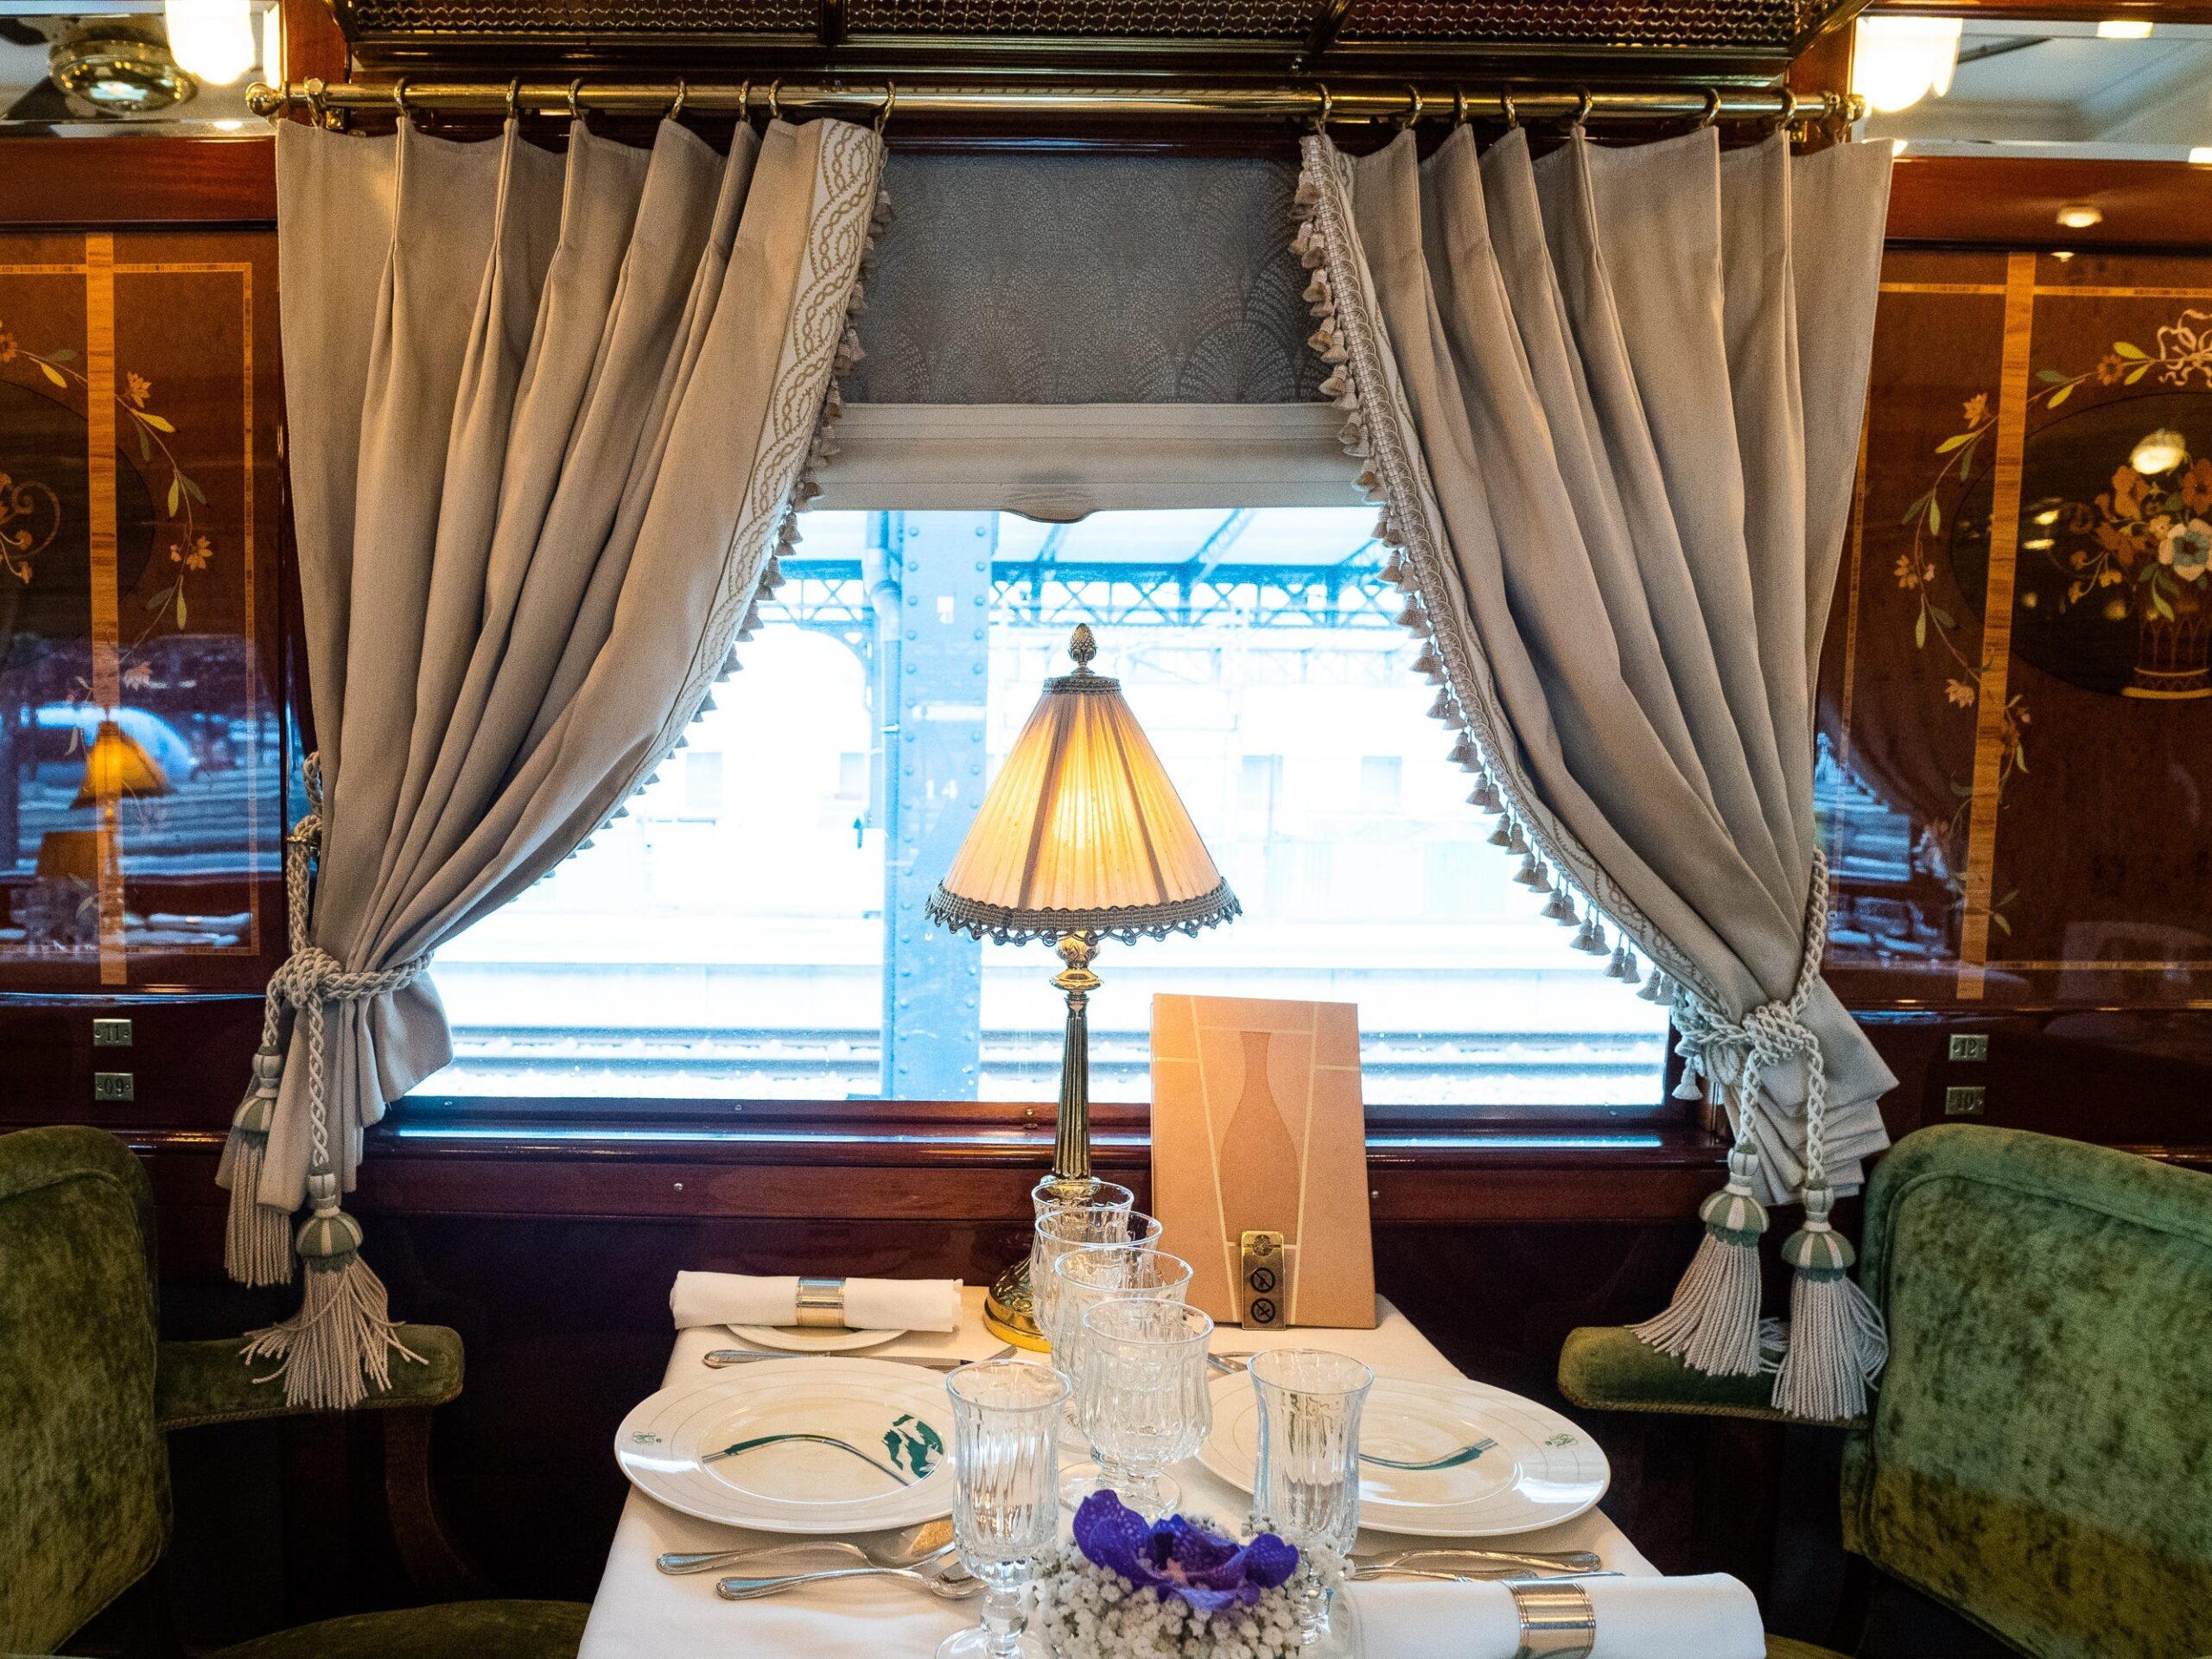 A dining table with a lamp on it on a luxury train